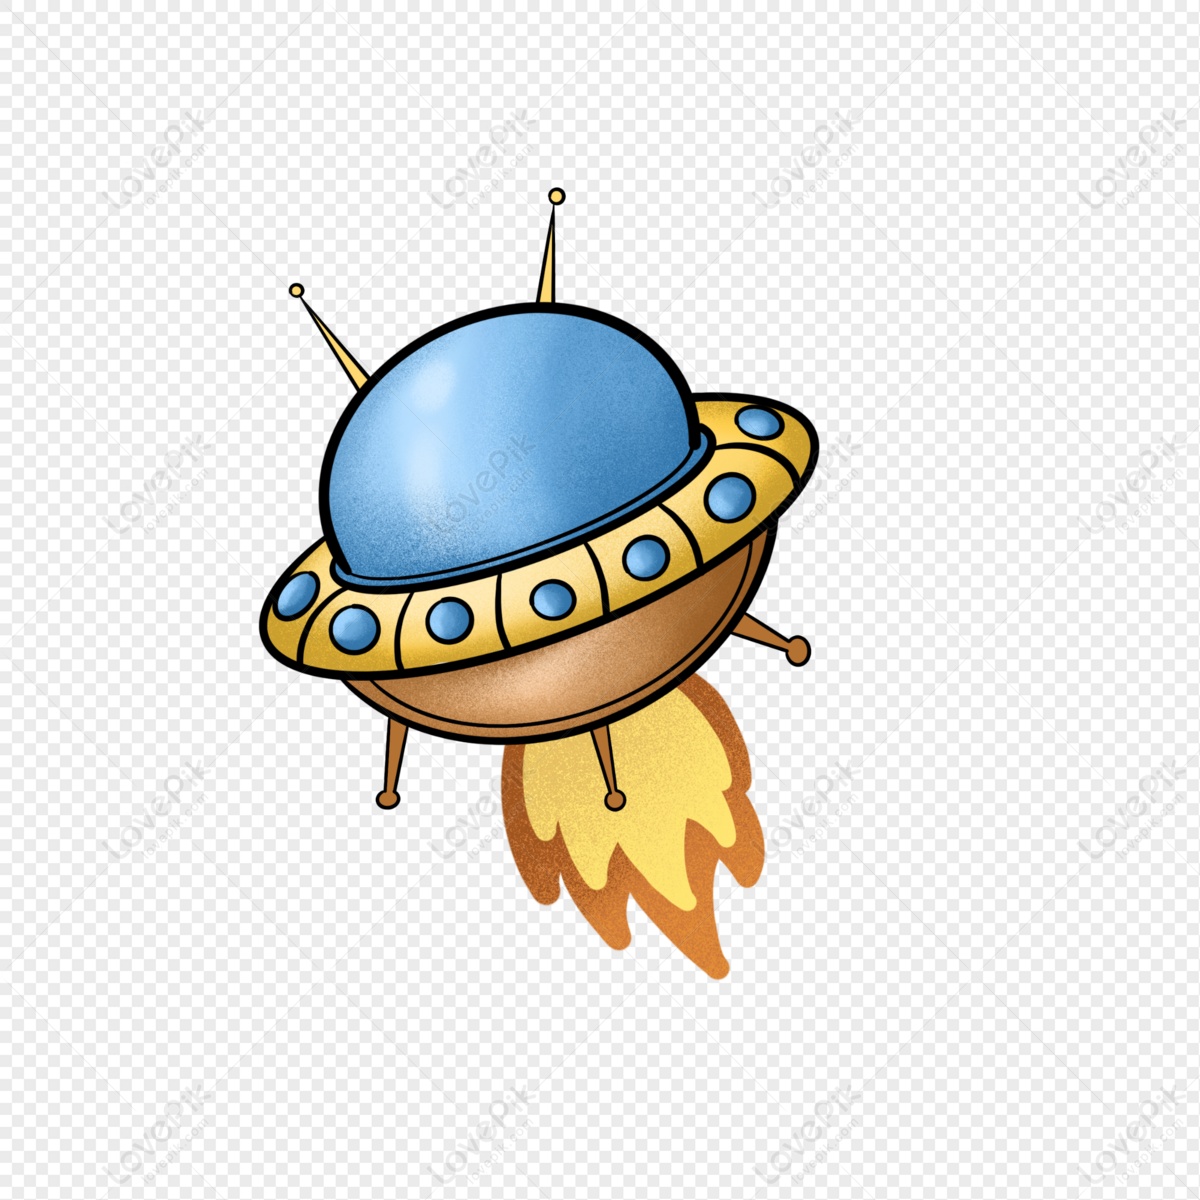 Spaceship Element PNG Hd Transparent Image And Clipart Image For Free  Download - Lovepik | 401718554